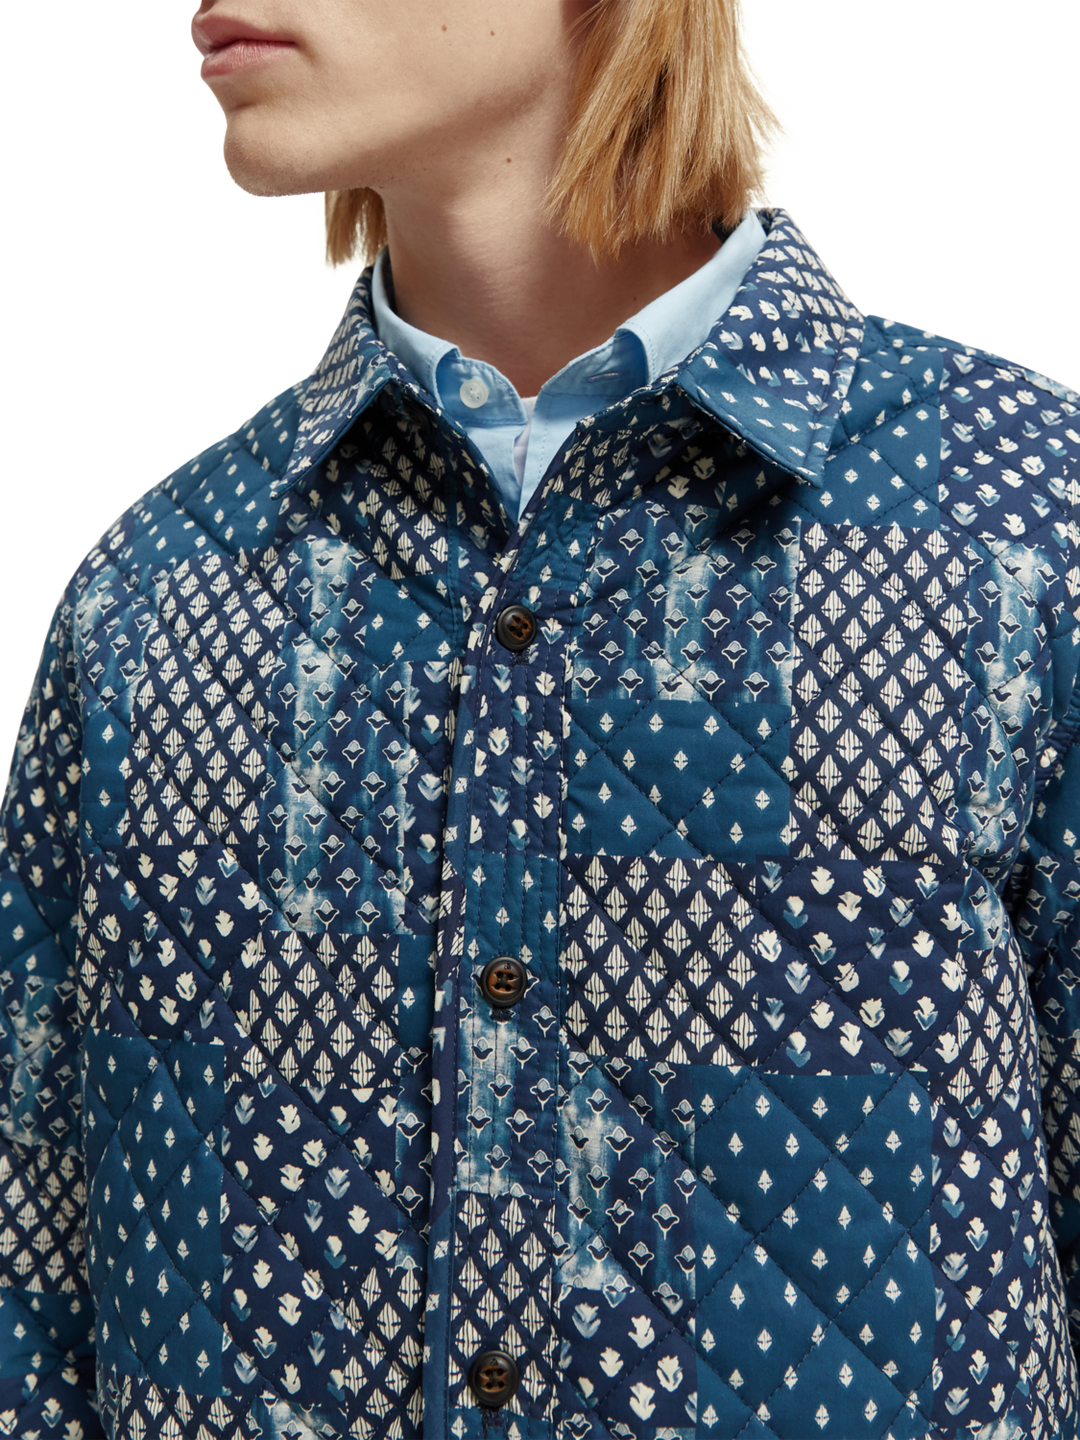 Printed Quilted Shirt Jacket Combo B 0218 | Buster McGee